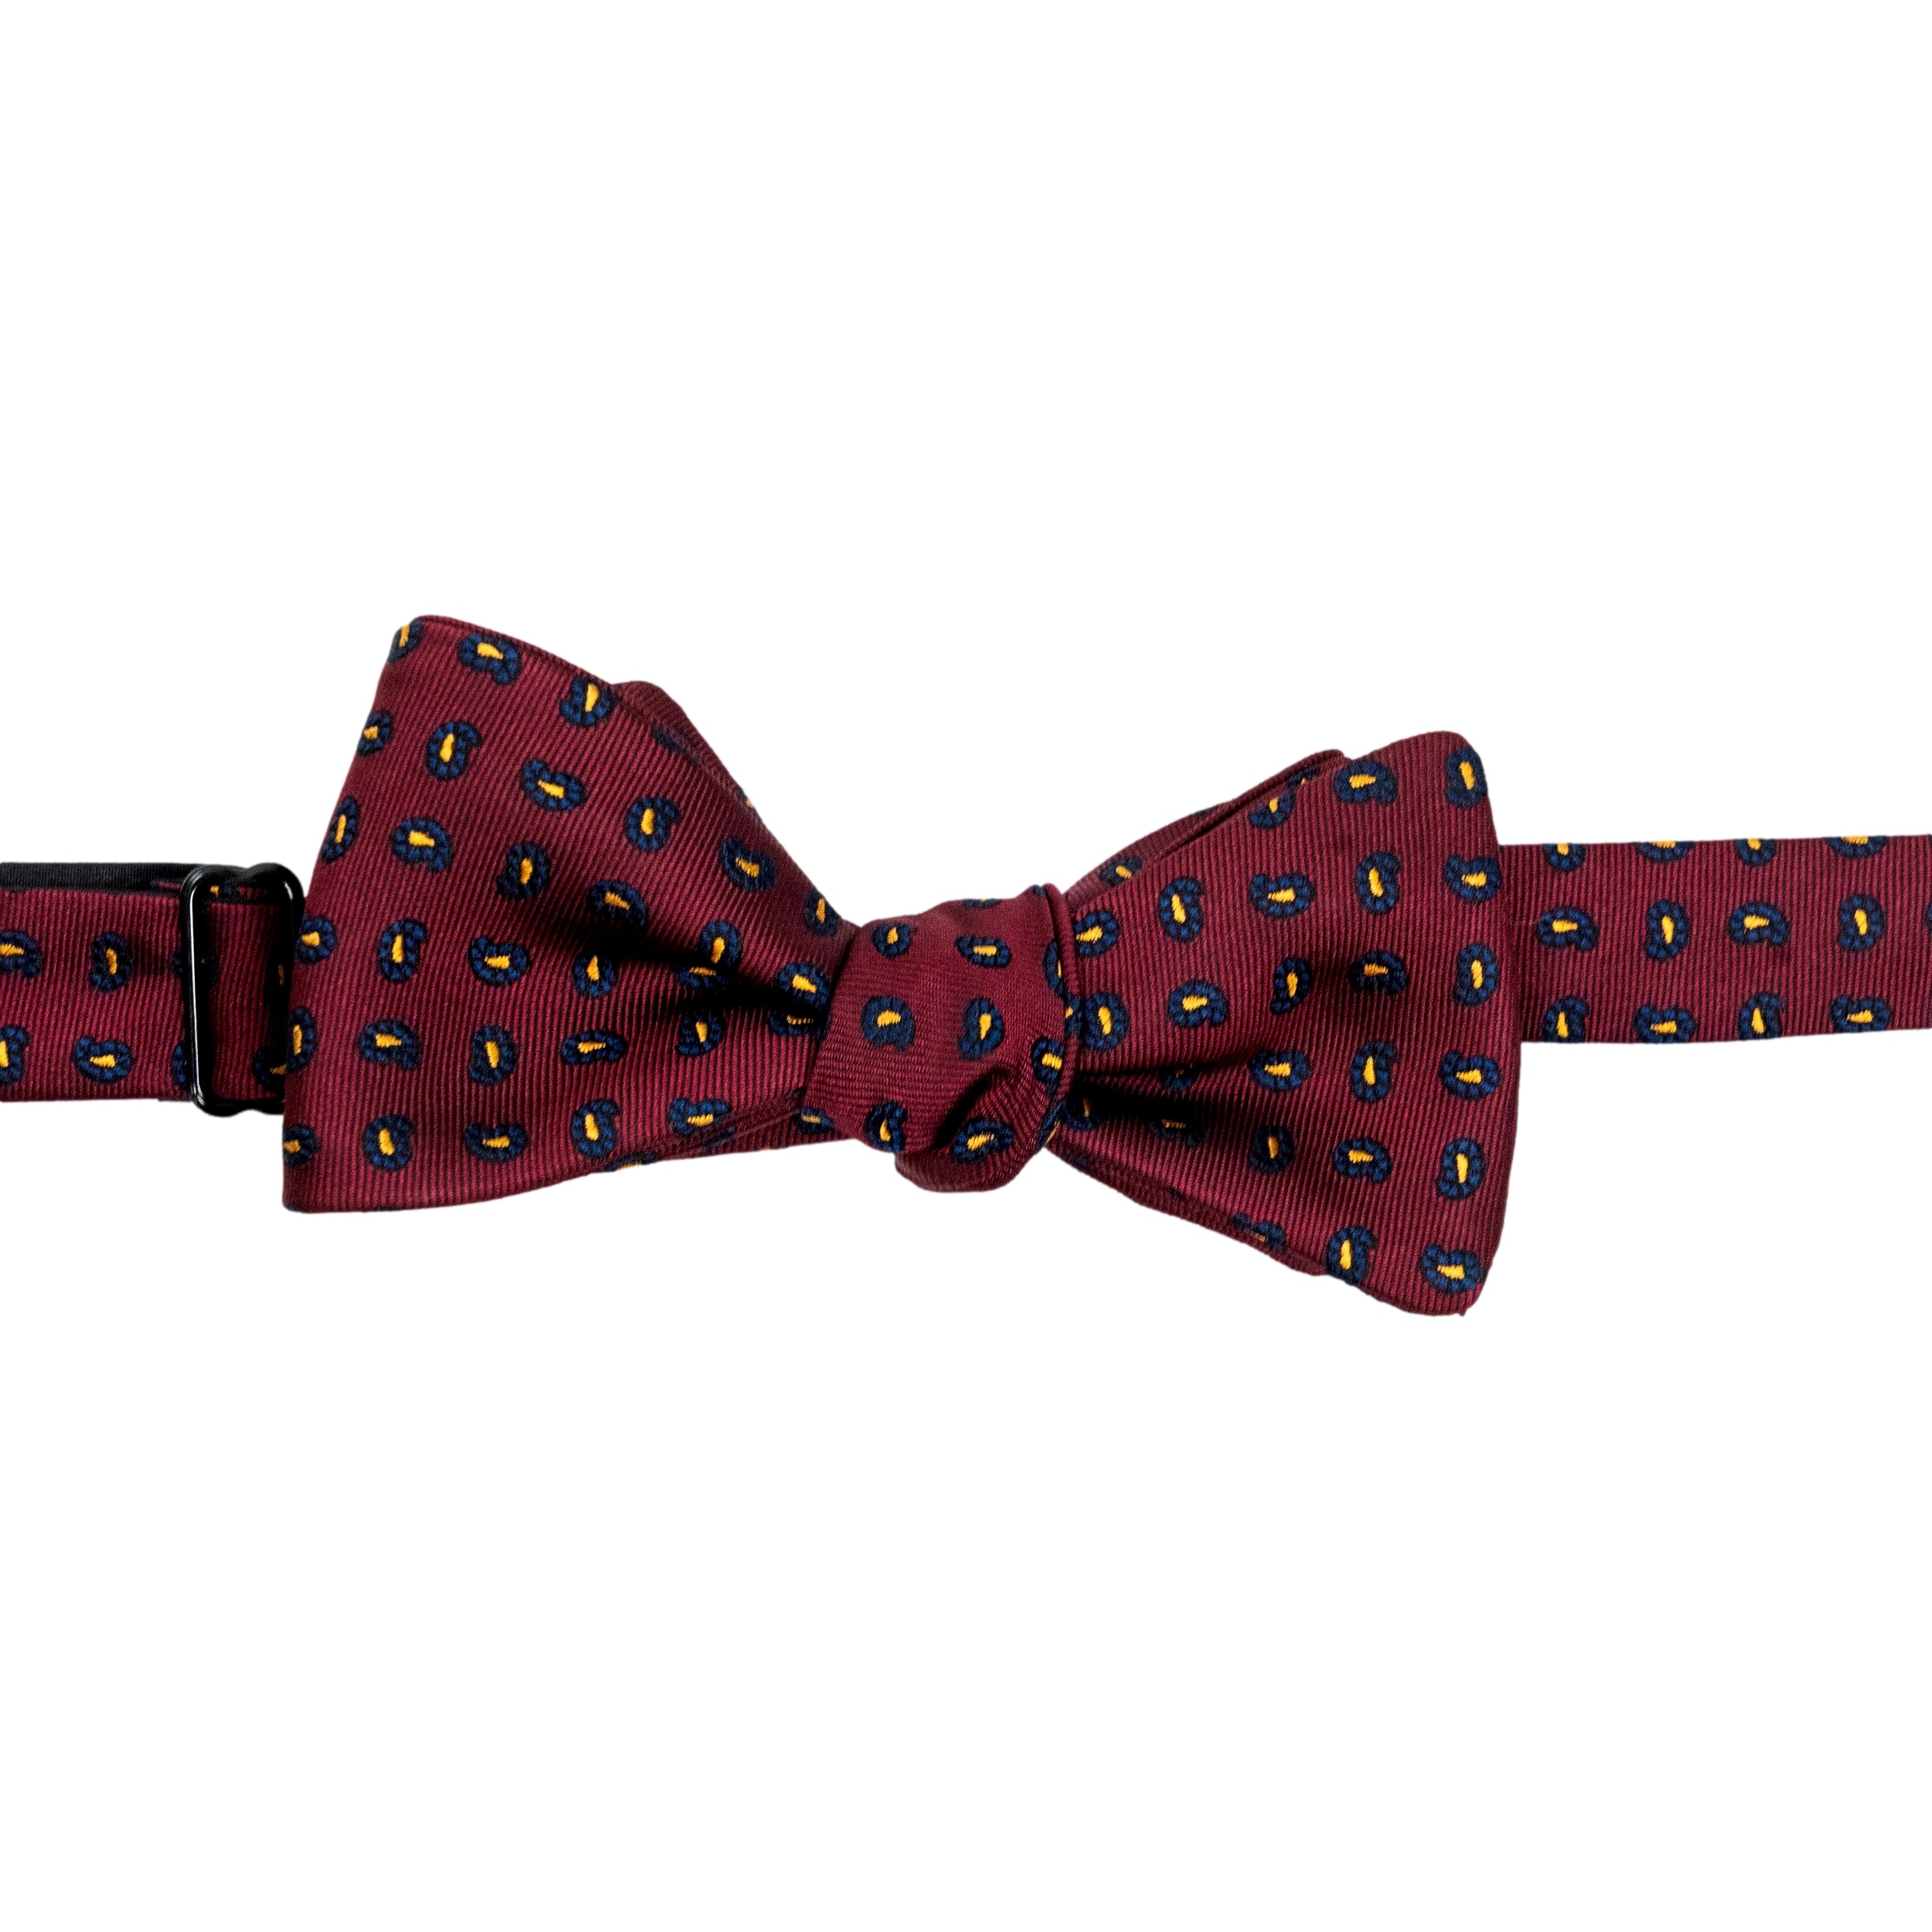 Woven Paisley Bow Tie